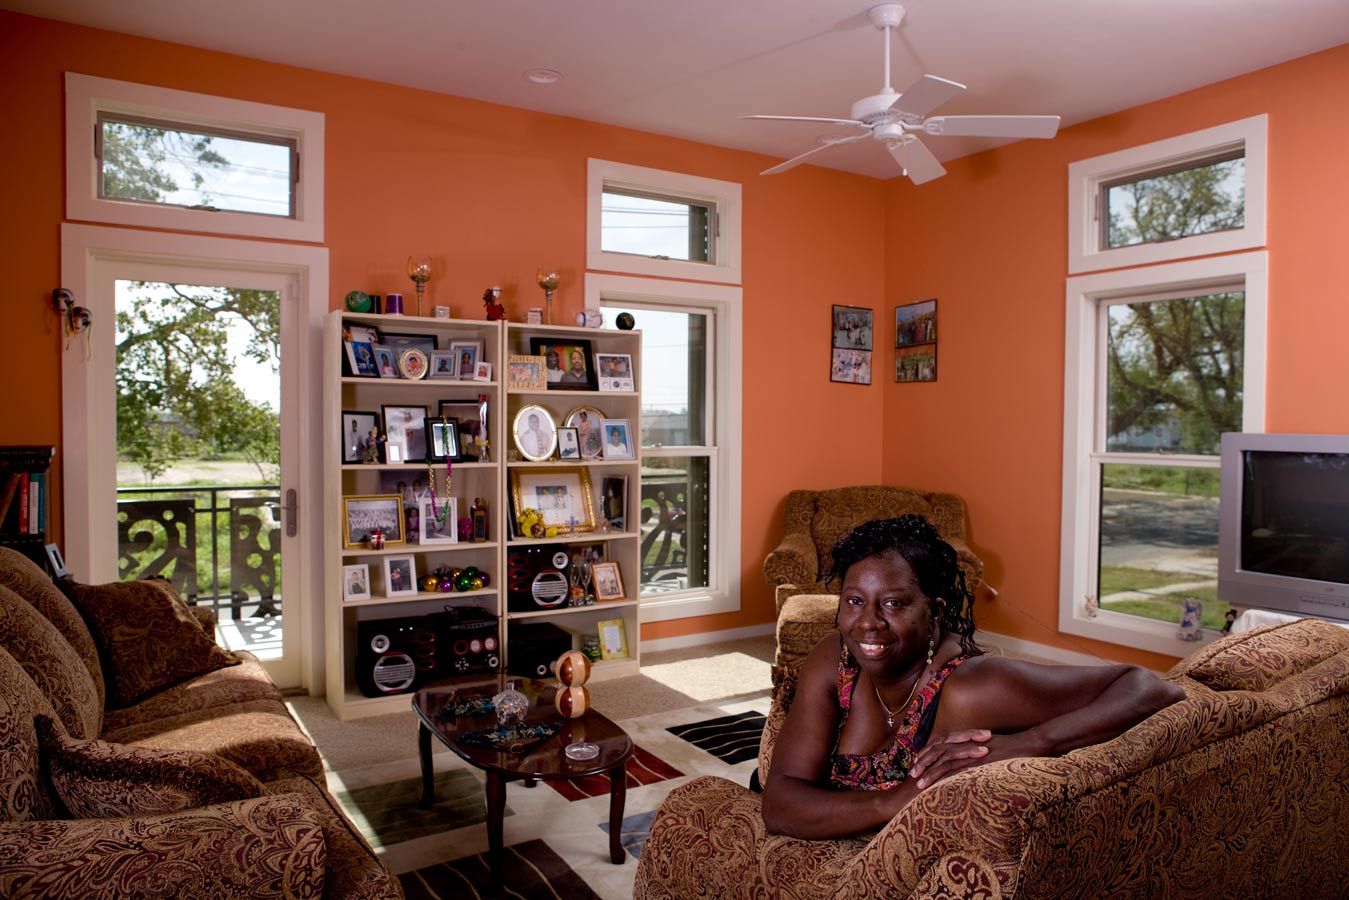 <p>Melba Barnes, the first owner of a KieranTimberlake house in the Lower Ninth Ward, in her completed home on Tennessee Street. Barnes lost her previous home in Hurricane Katrina. <br><small>&copy; Alexei Lebedev/Momenta</small></p>